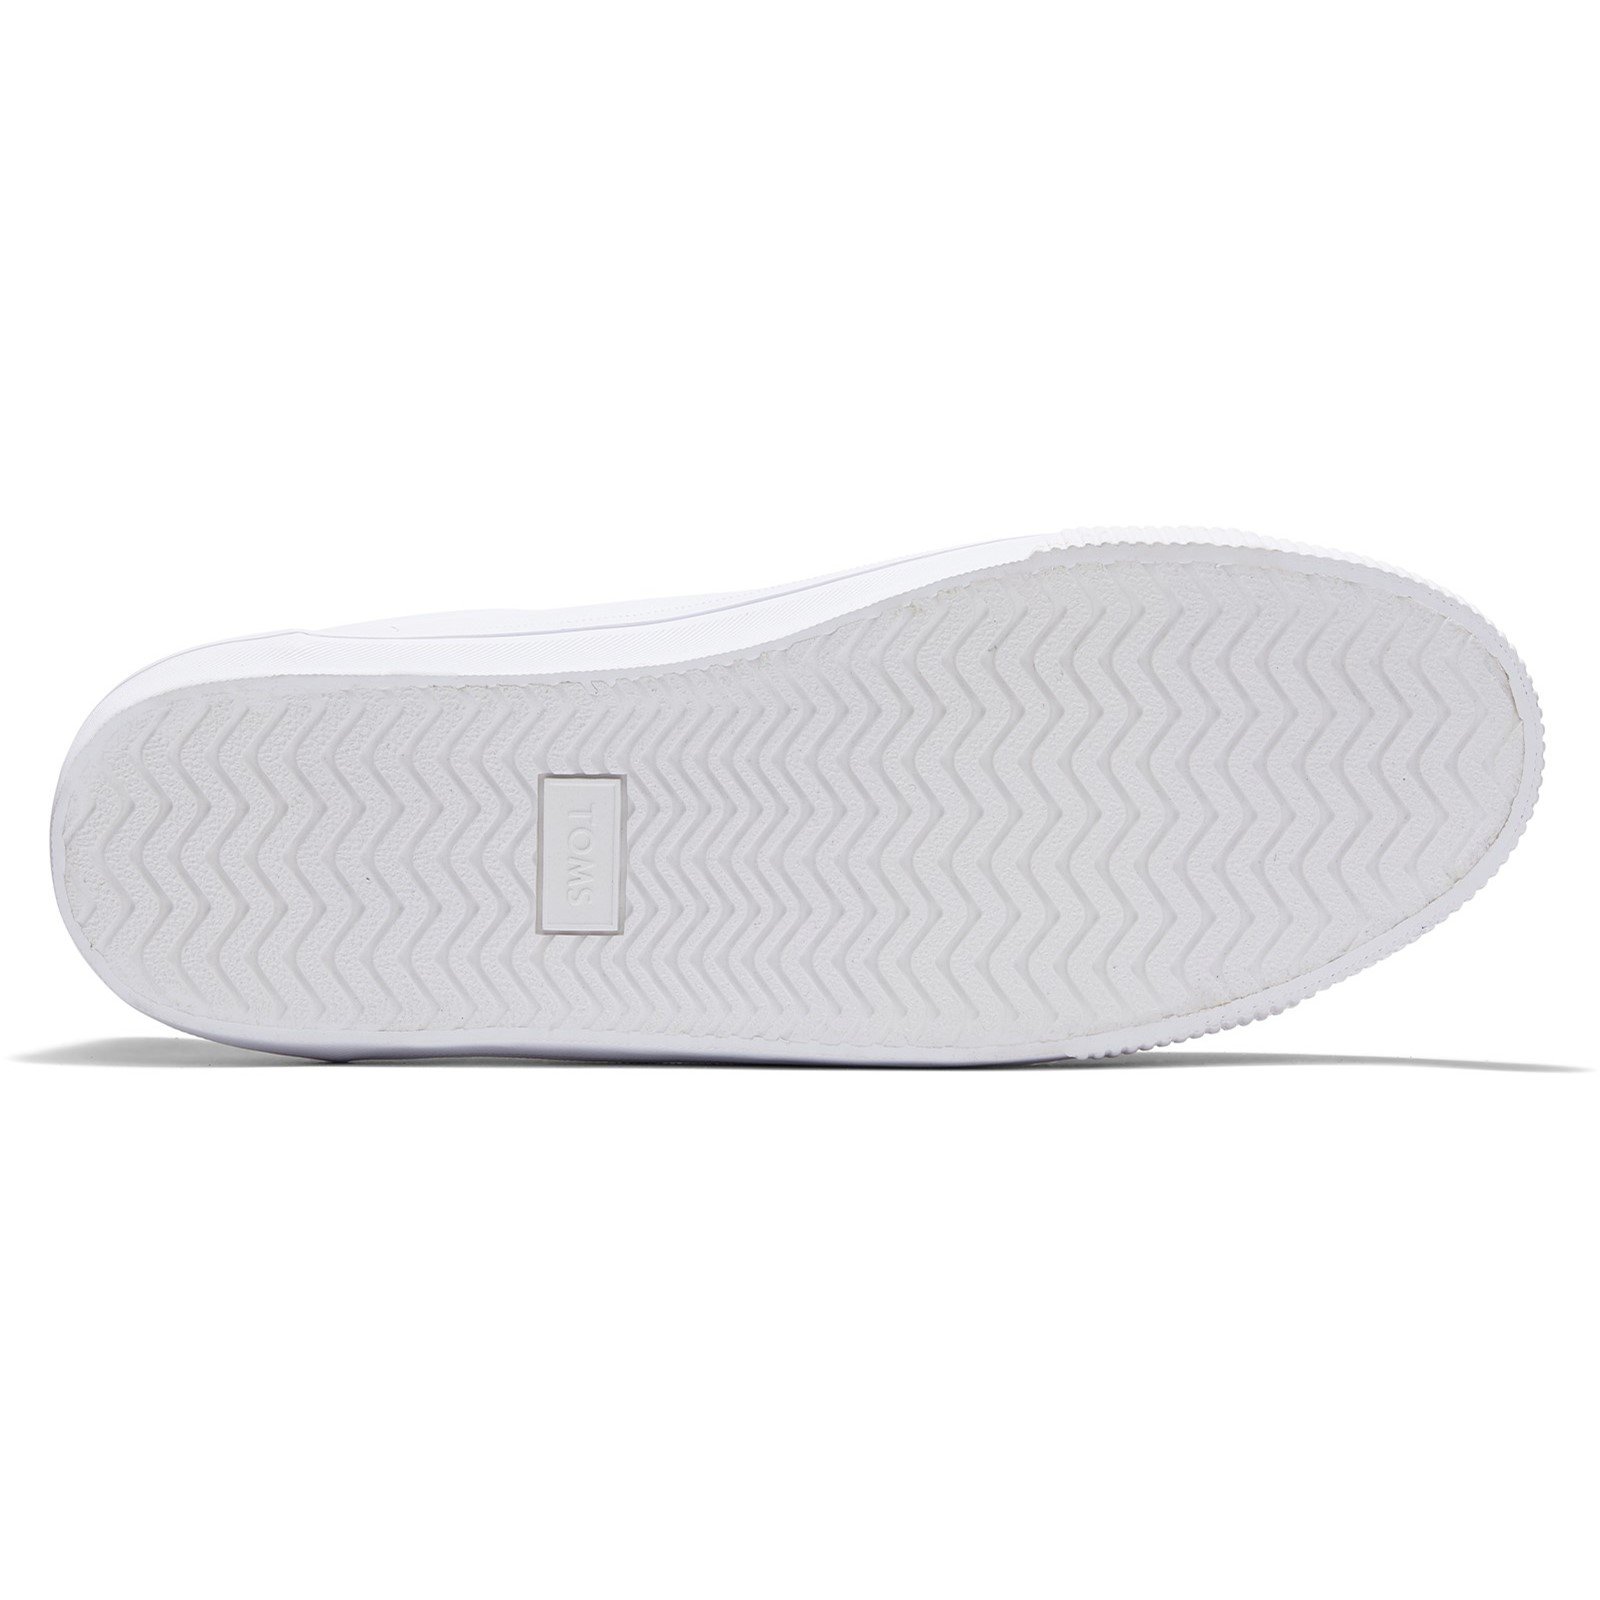 TOMS Men's Carlson Leather Trainer Various Colours 32558 - White 11